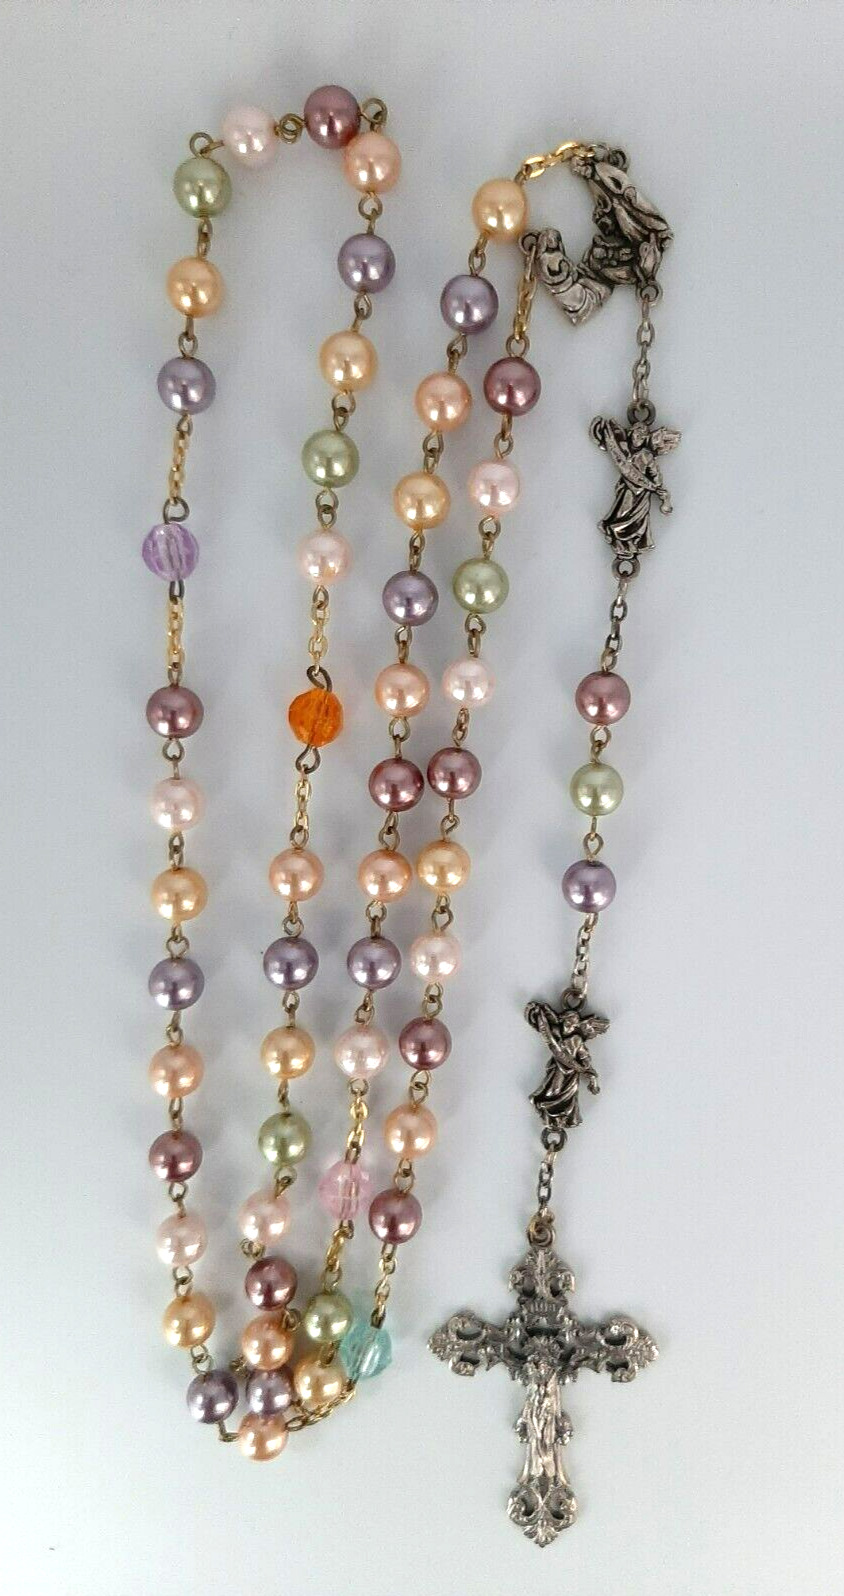 Rosary w/Silver tone Angels Holy Family Colored Faux Pearls/Beads, Made in Italy